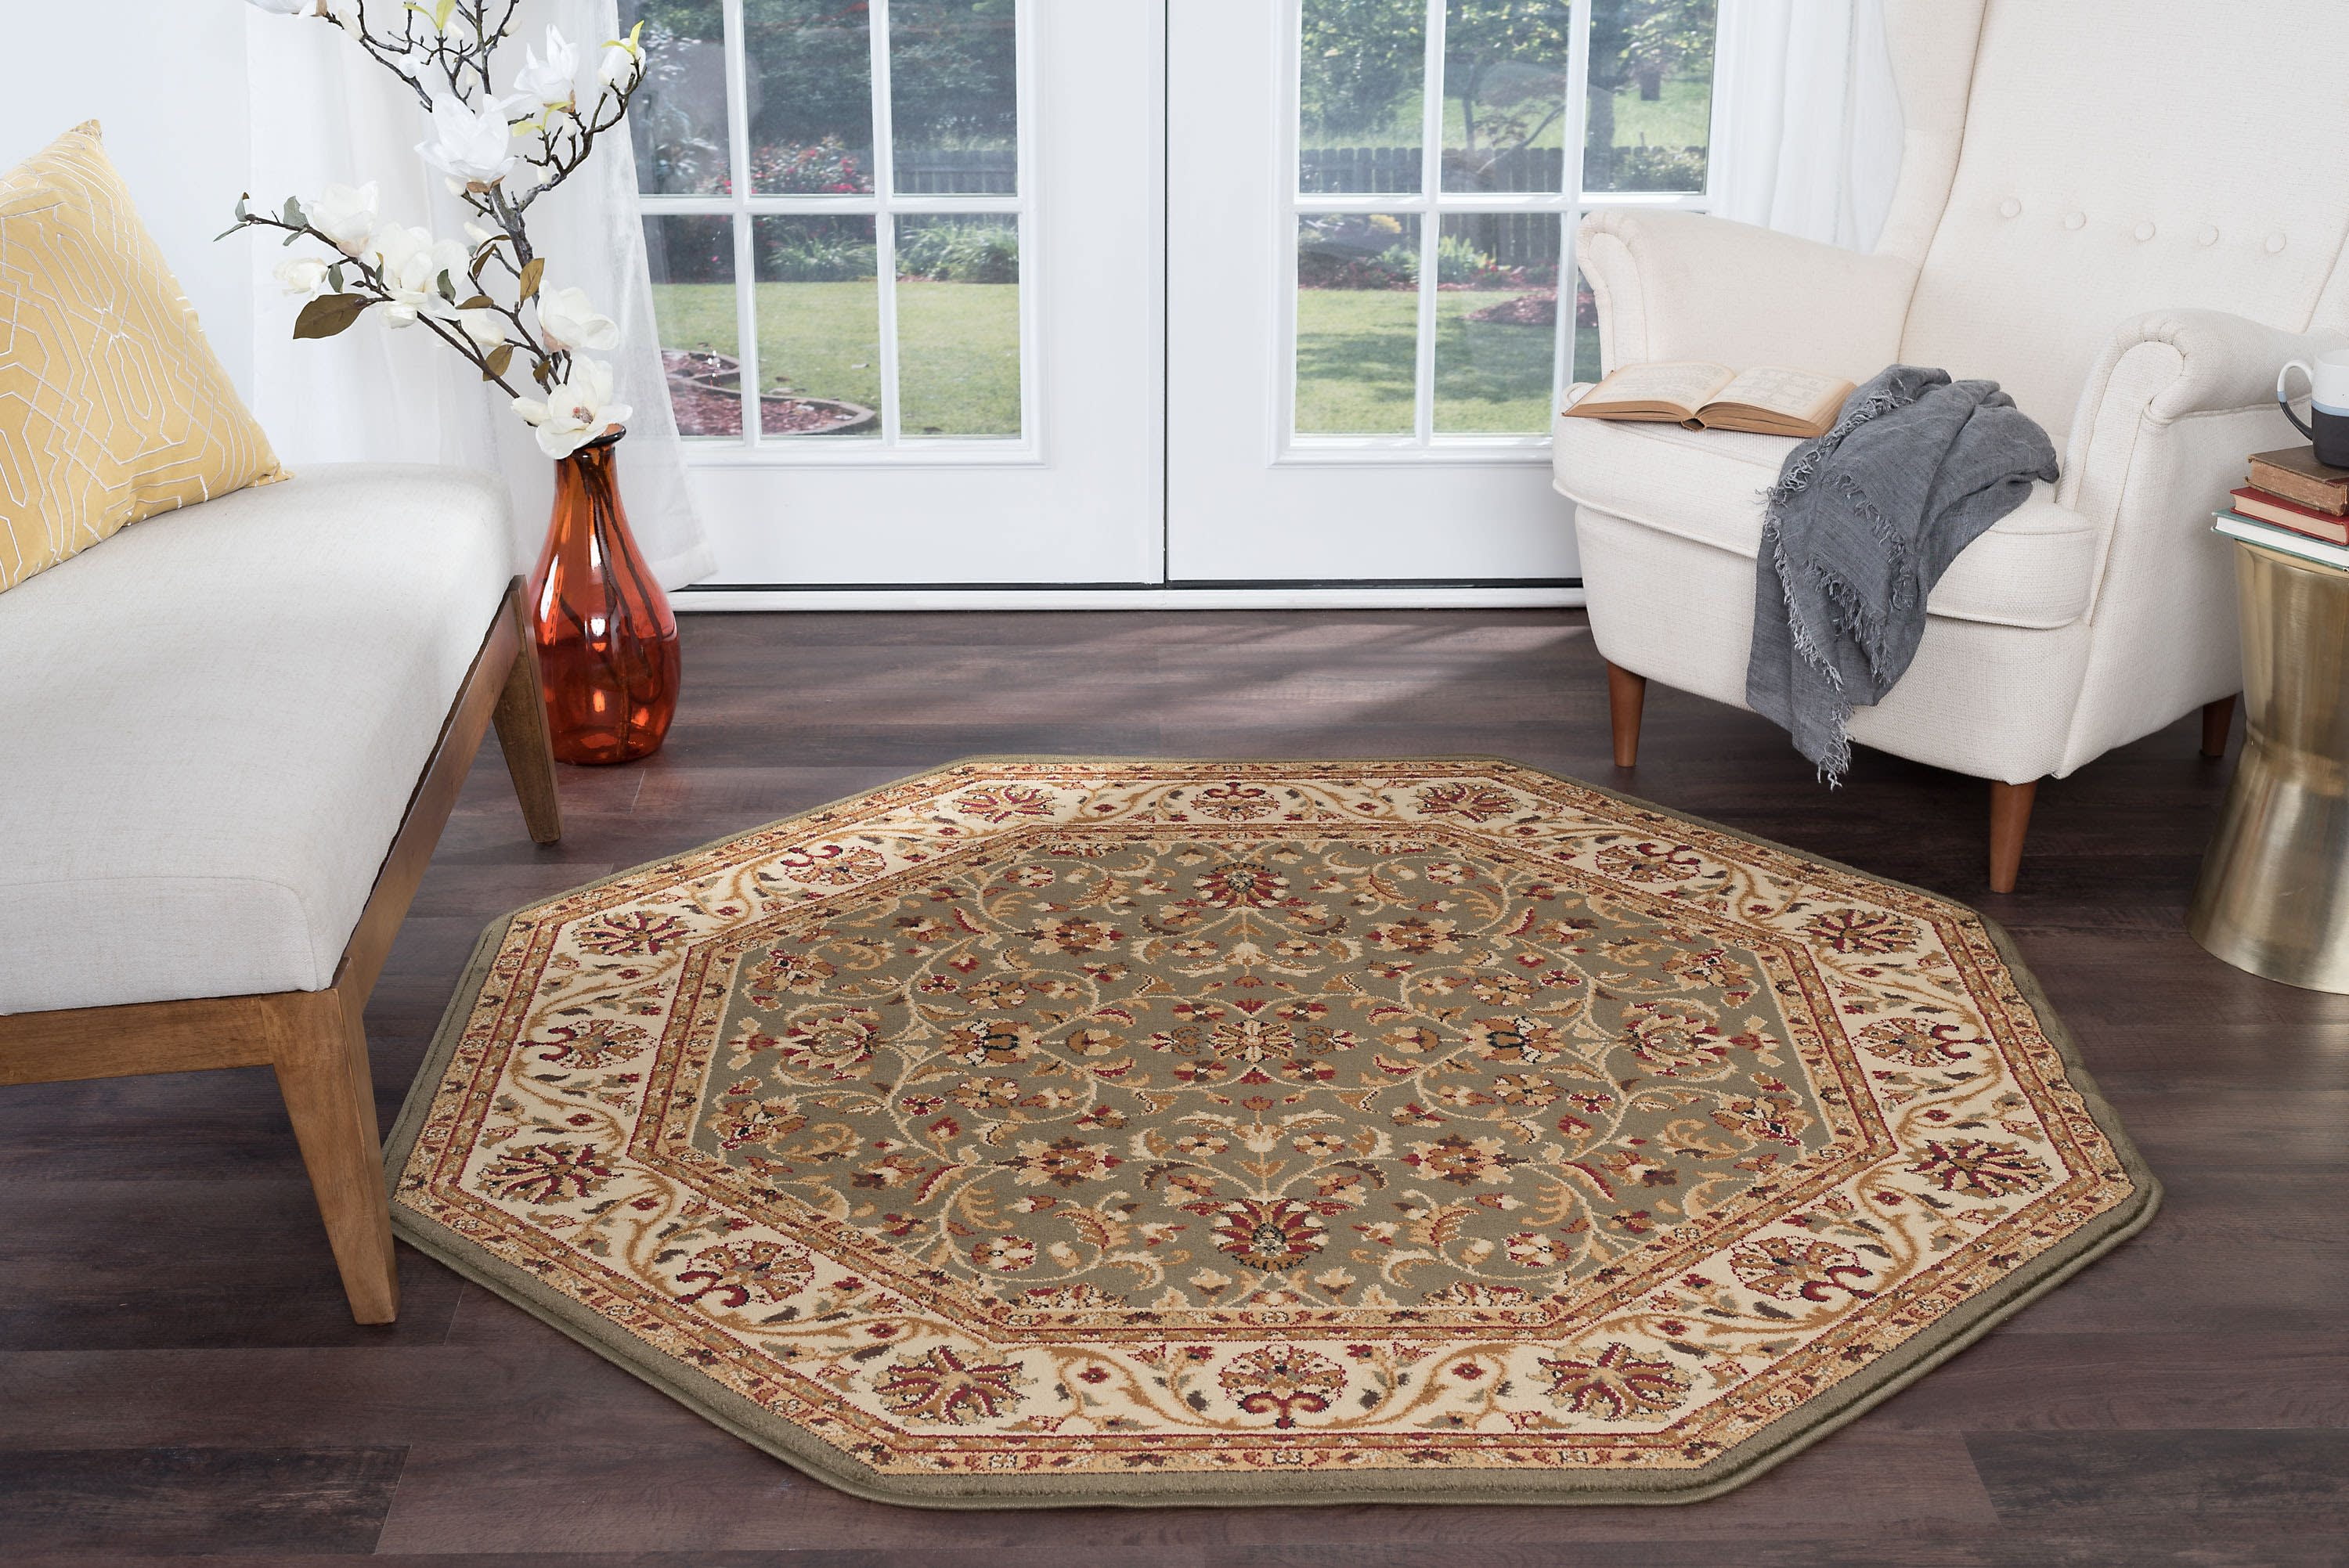 6oct Traditional Green Octagon Area Rugs For Living Room Bedroom Rug Dining Indoor Entry Or Entryway Kitchen Alfombras Para Salas 5 3 Com